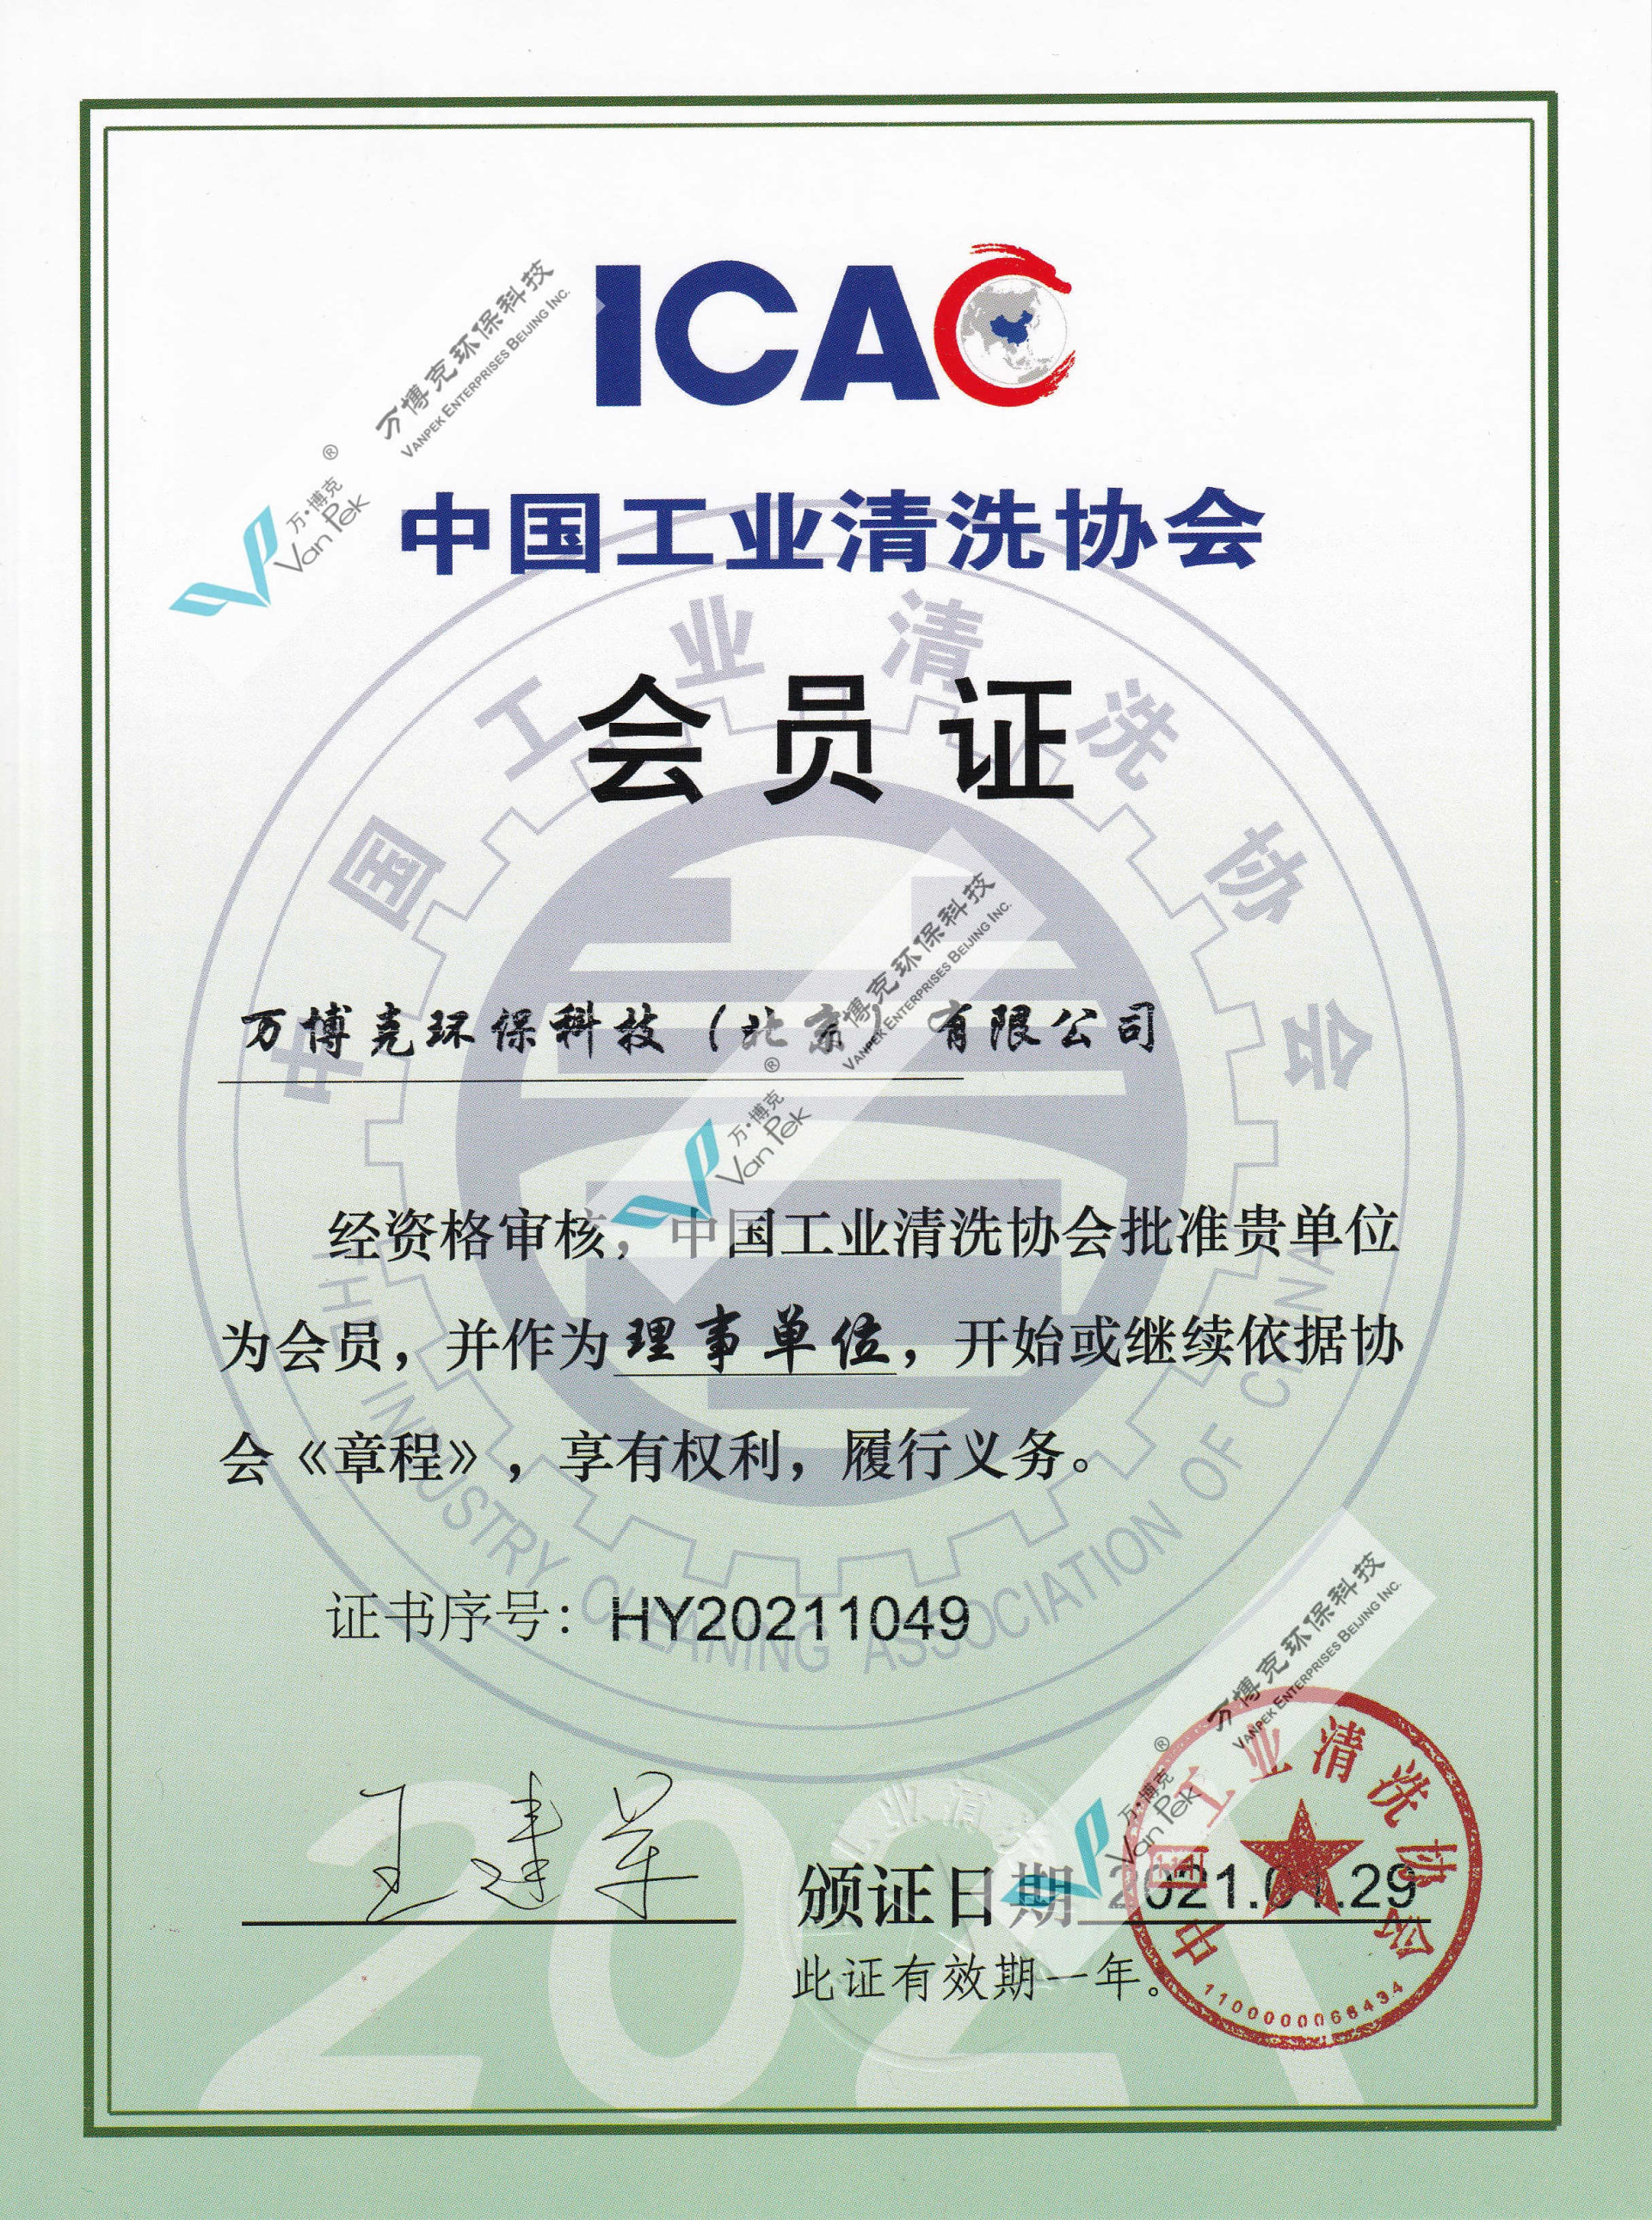 Member of the Council of ICAC (2021)